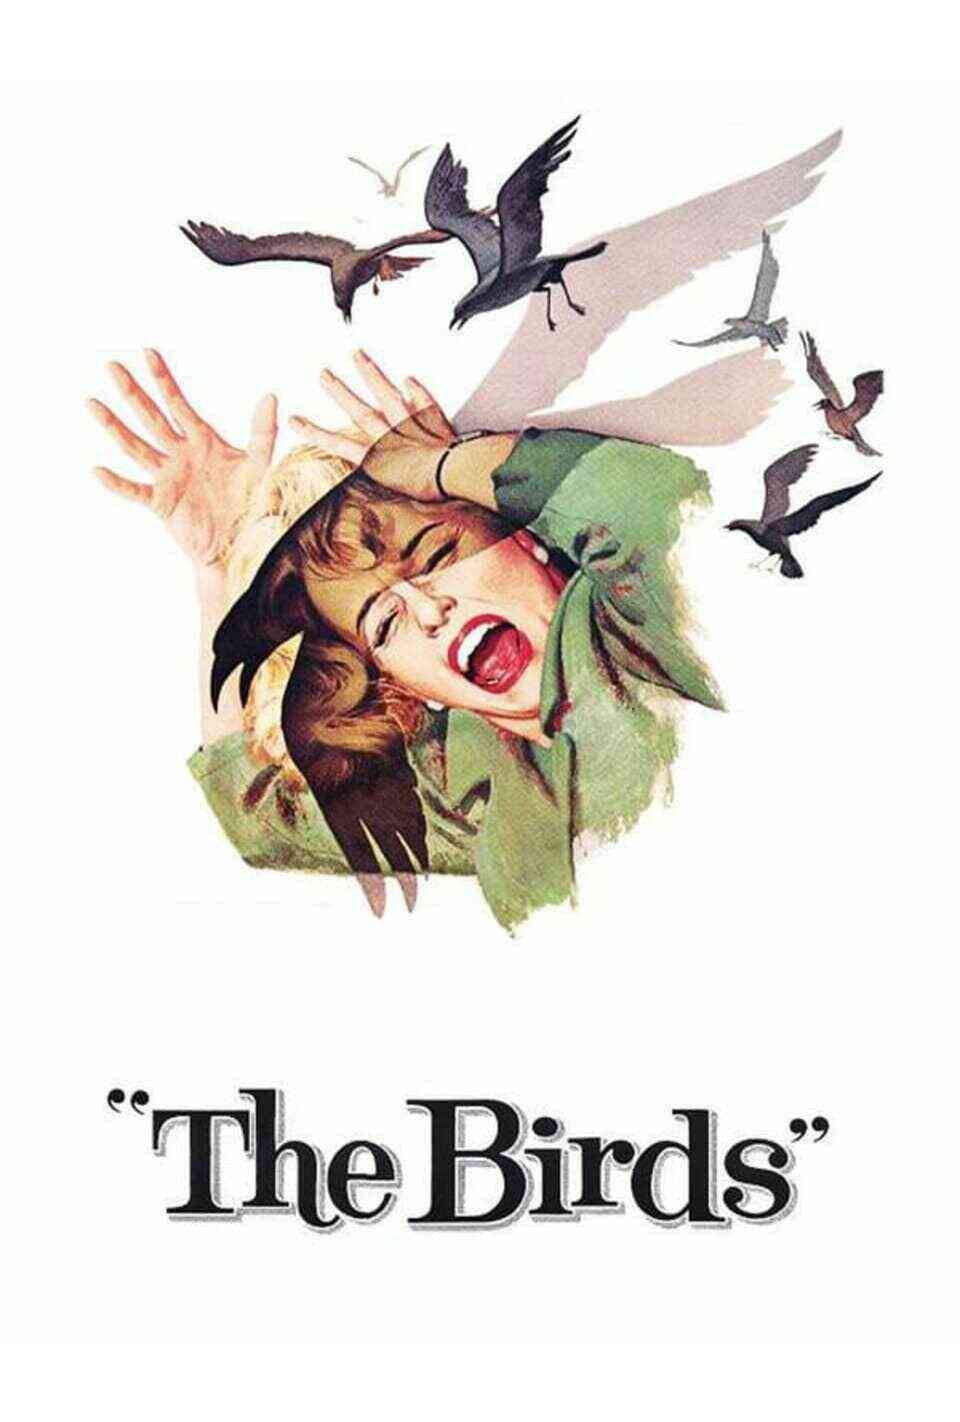 Read The Birds screenplay (poster)